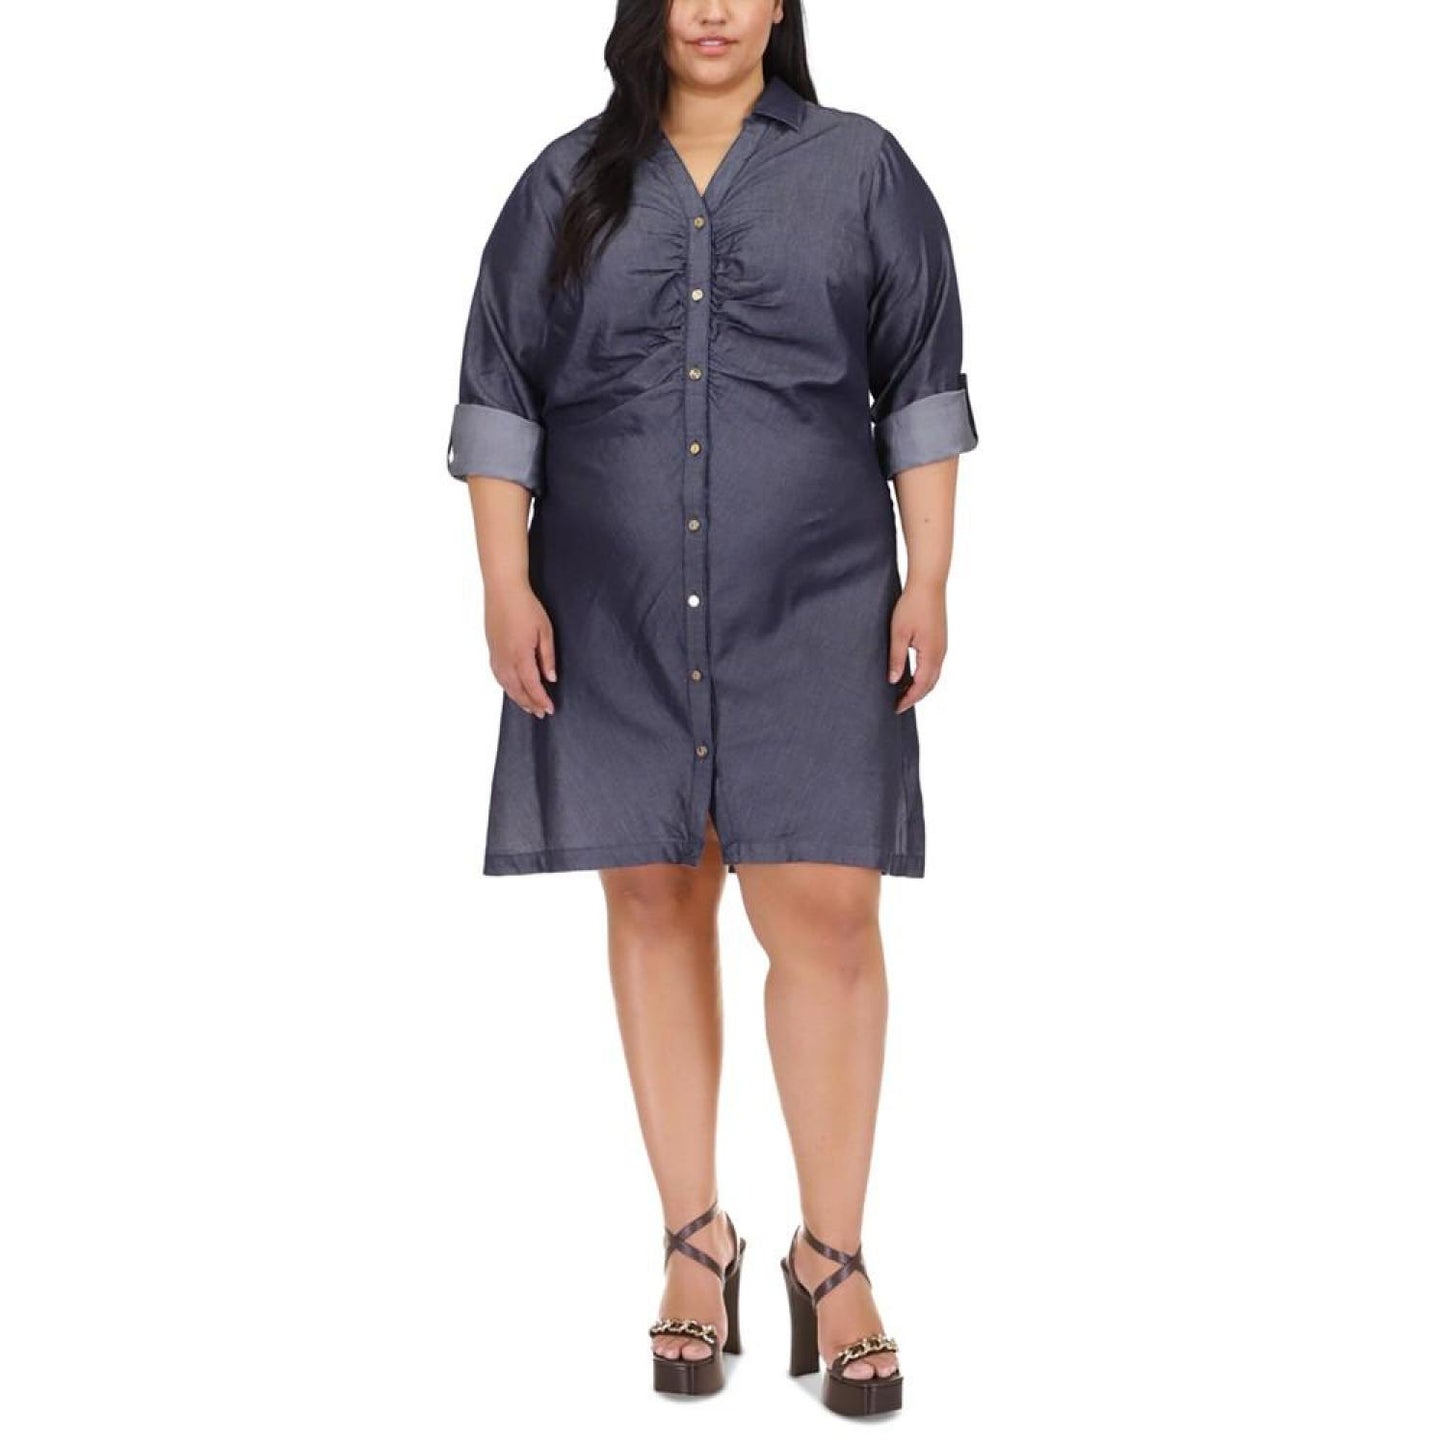 Plus Size Gathered-Front Collared Shirtdress